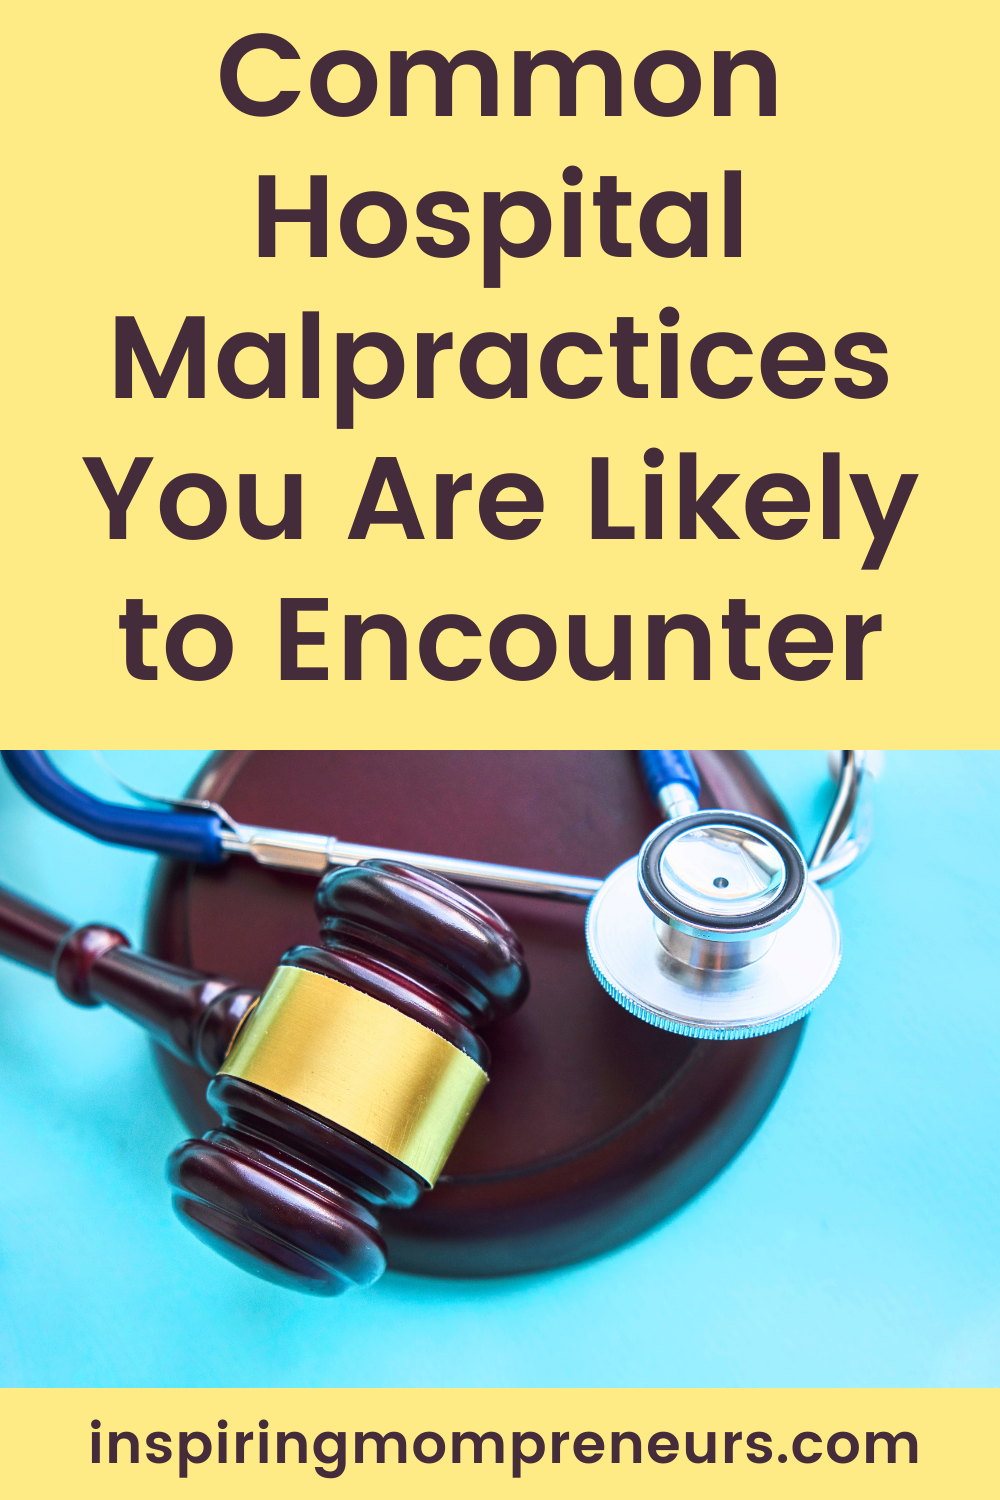 The purpose of this article is to inform you about some common malpractices that are likely to happen in hospitals in order to raise awareness and educate. 